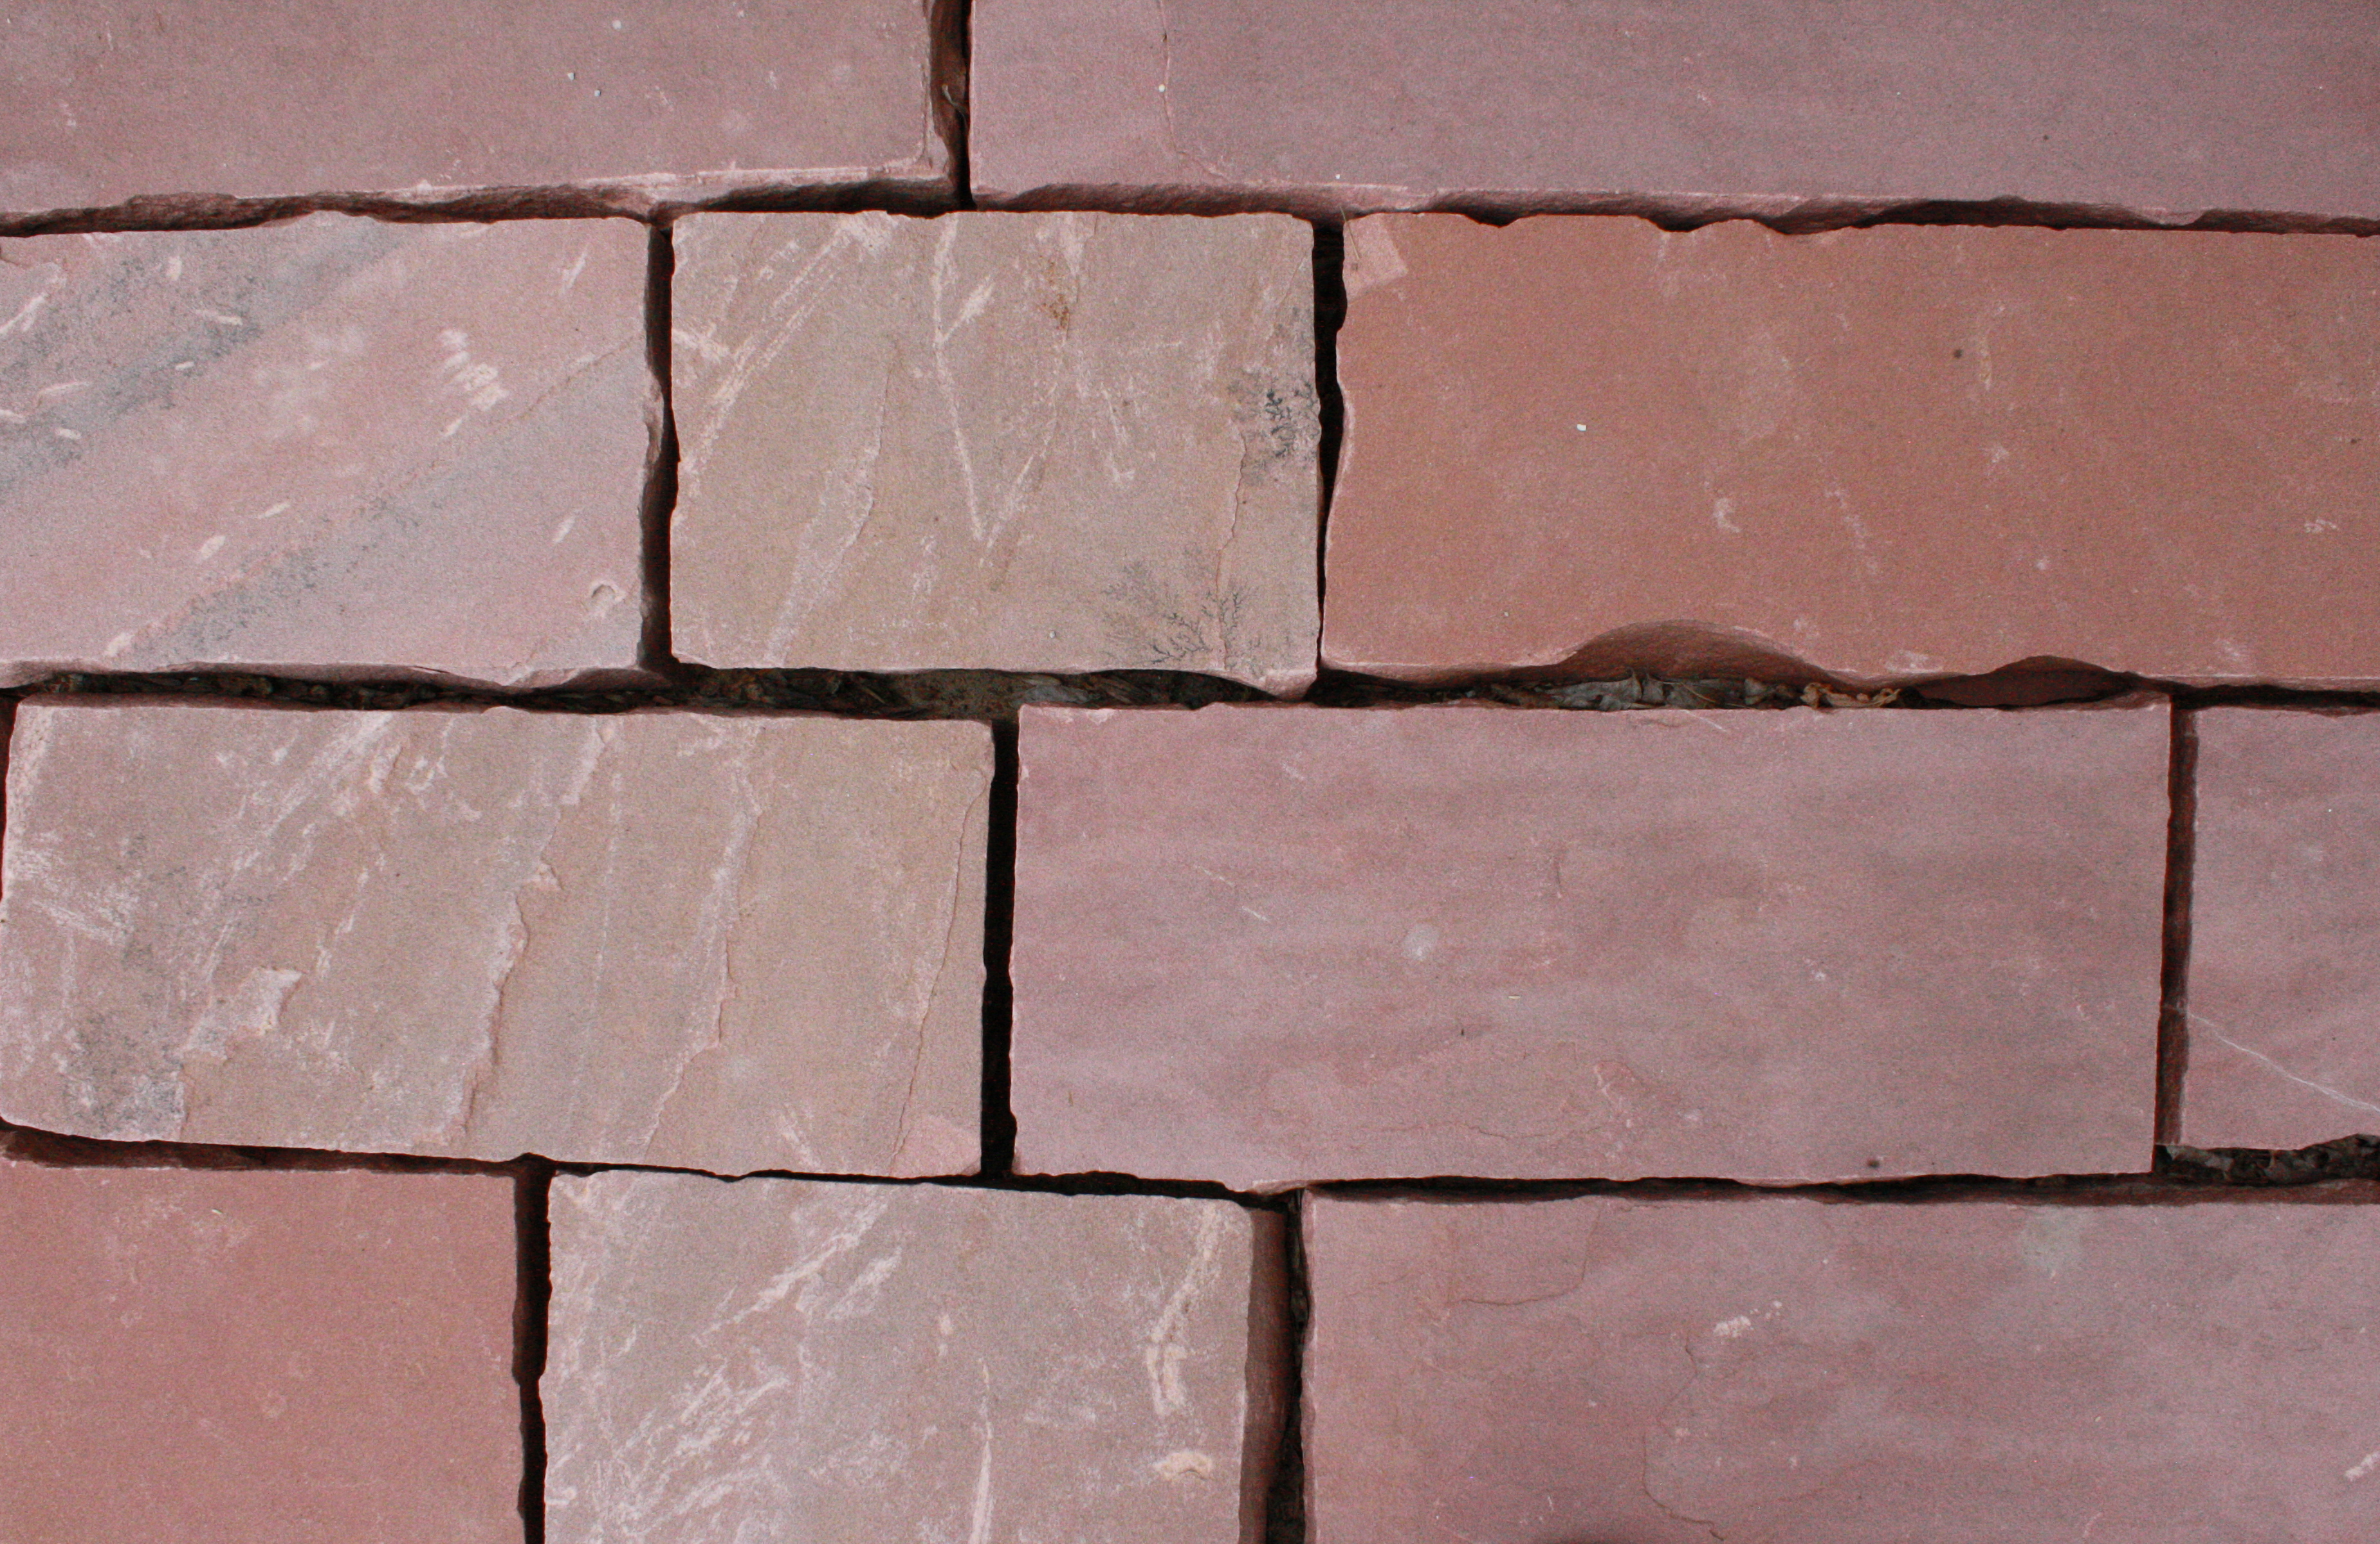 Red Flagstone Blocks Texture Picture | Free Photograph ...